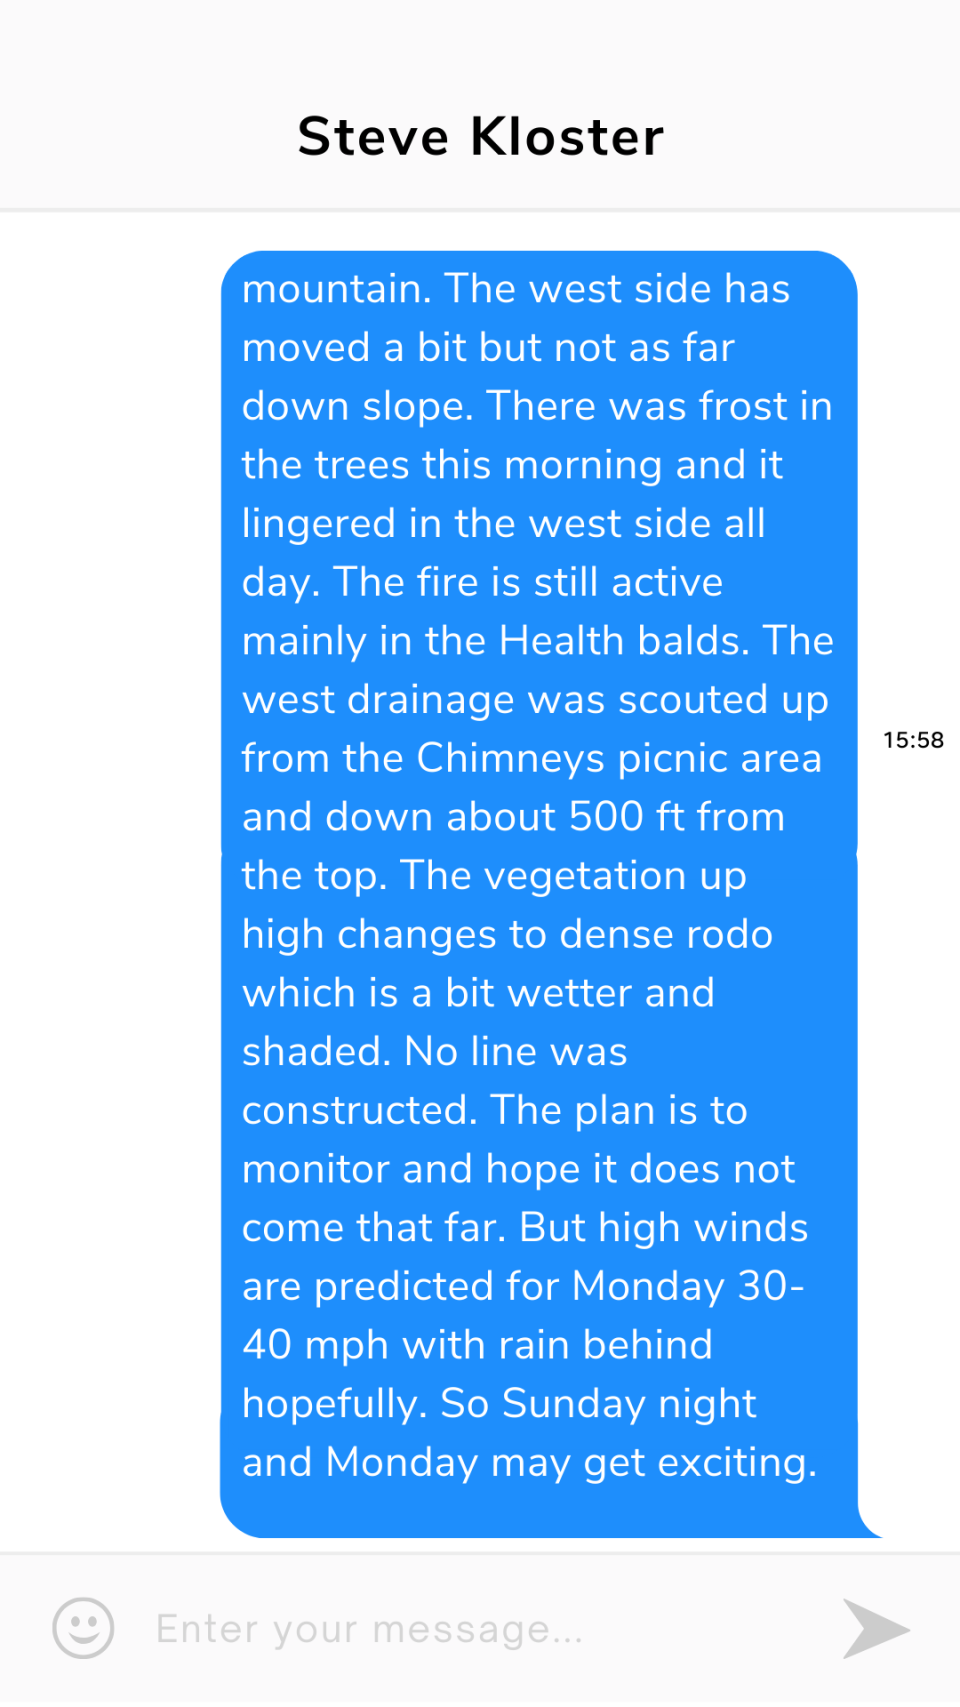 "Monday may get exciting," texted Greg Salansky, the man in charge of fighting the Chimney Tops 2 wildfire in 2016. Corresponding texts show it was sent at 5:58 p.m., though it's listed as 15:58 (or 3:58 p.m.) here.